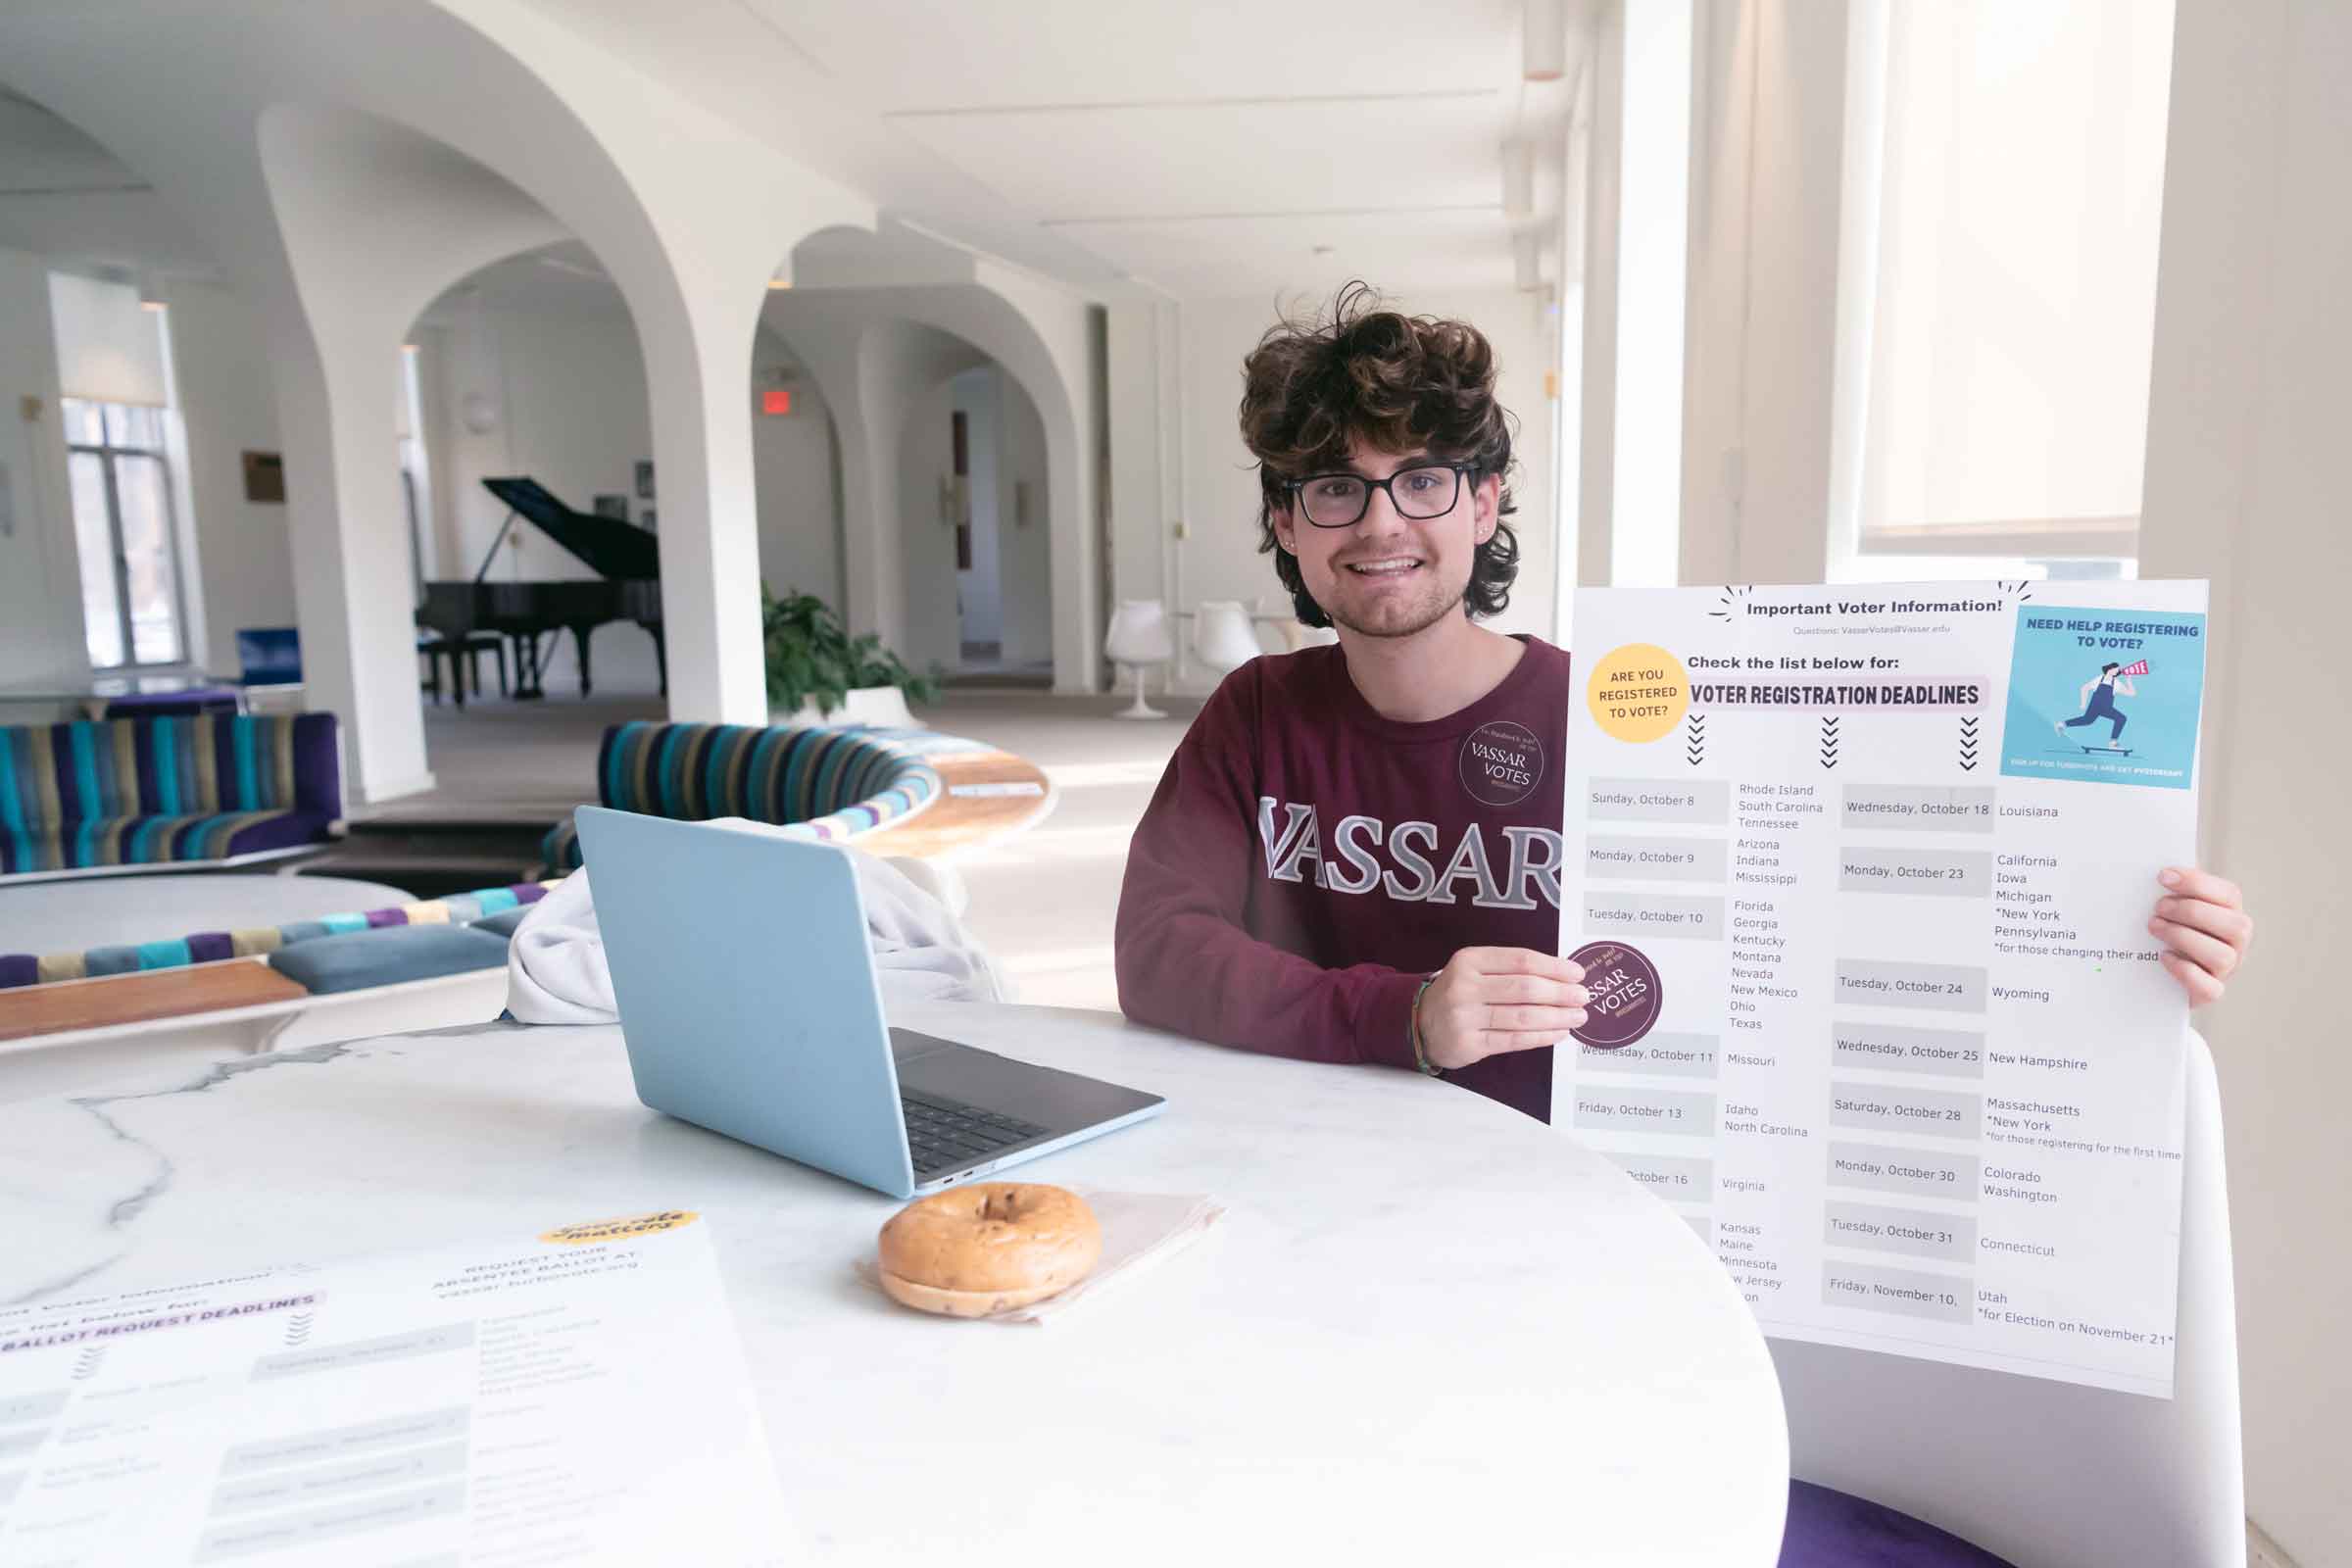 A smiling person sits at a table with a bagel and a laptop holding up a voter registration deadline poster.